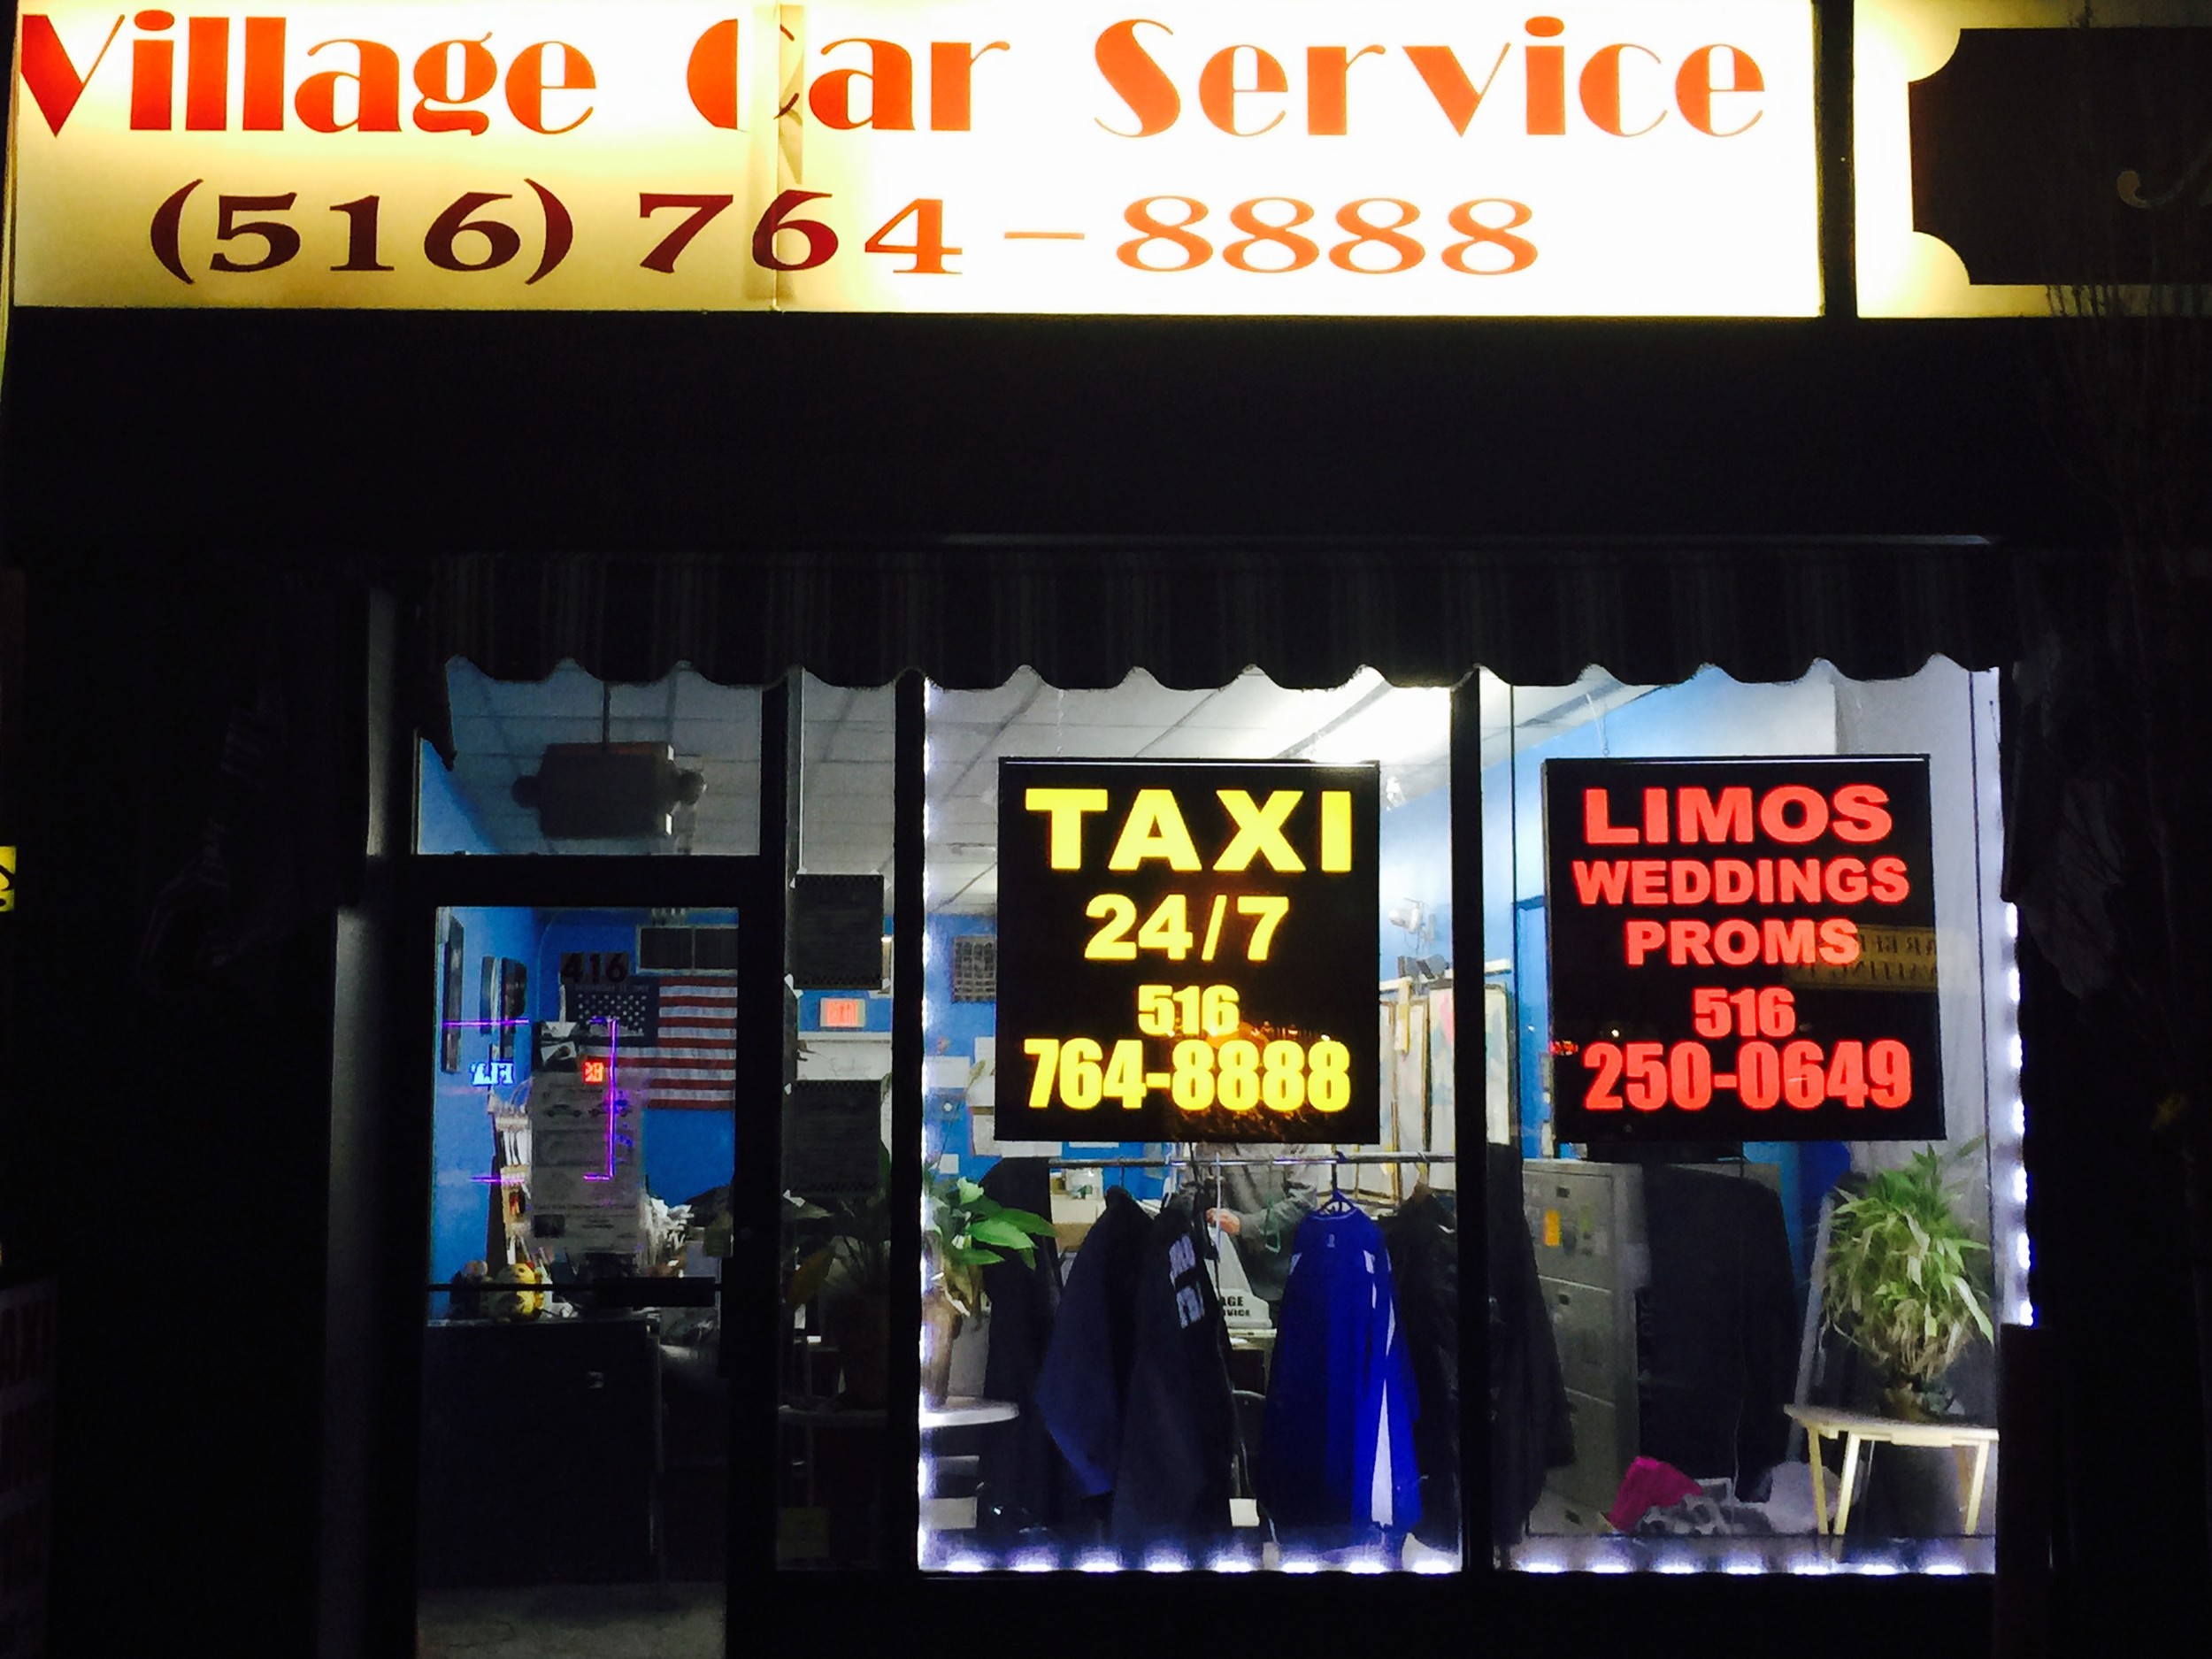 Village Car Service owner David O’Neill voiced his concerns about ride-sharing coming to Long Island. The program went into effect on June 29.